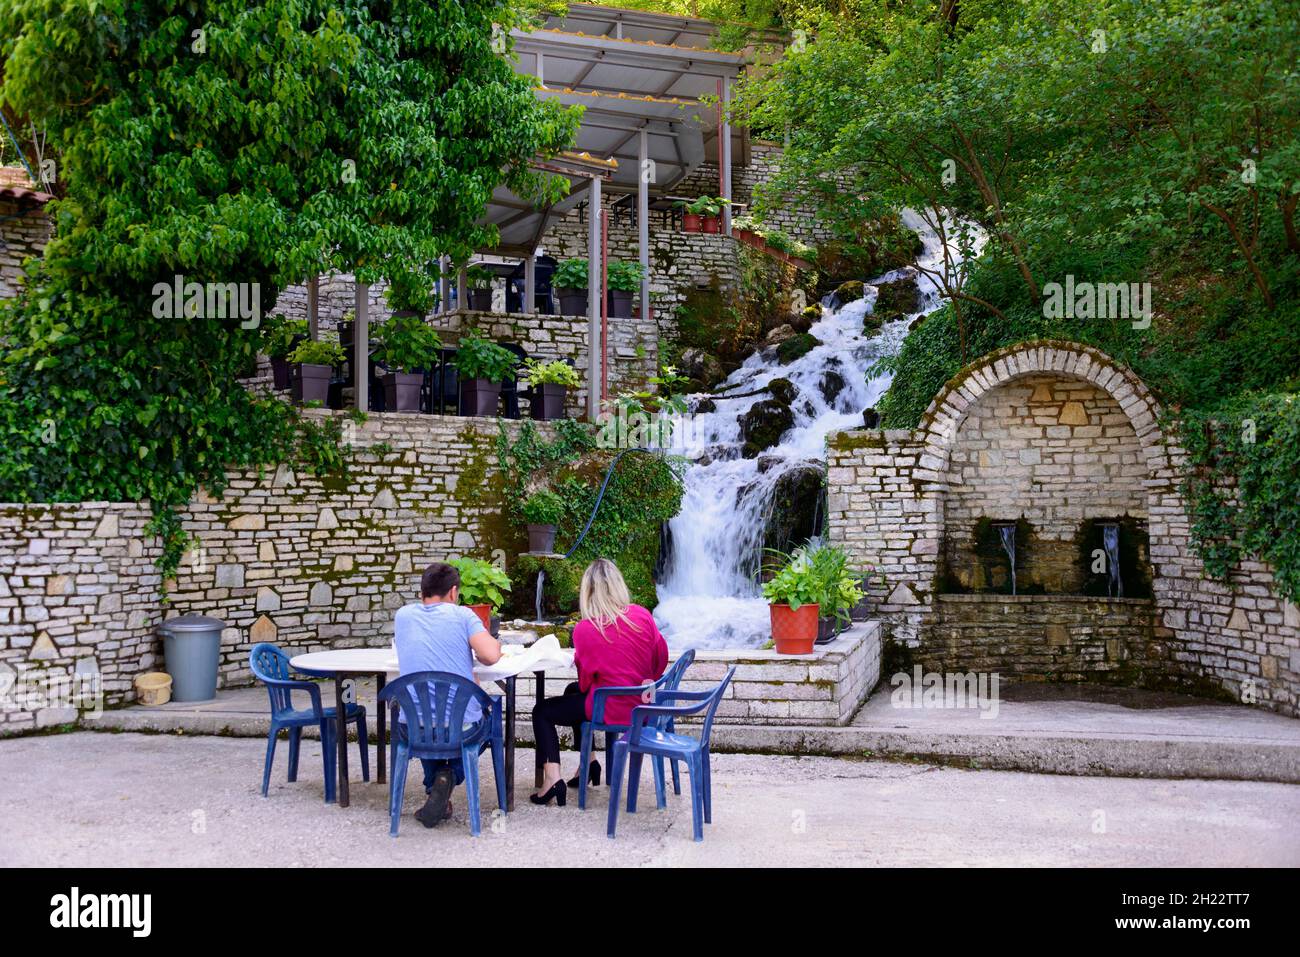 Restaurant at spring, Cold Water Natural Monument, Uji i Ftothe, Albania Stock Photo